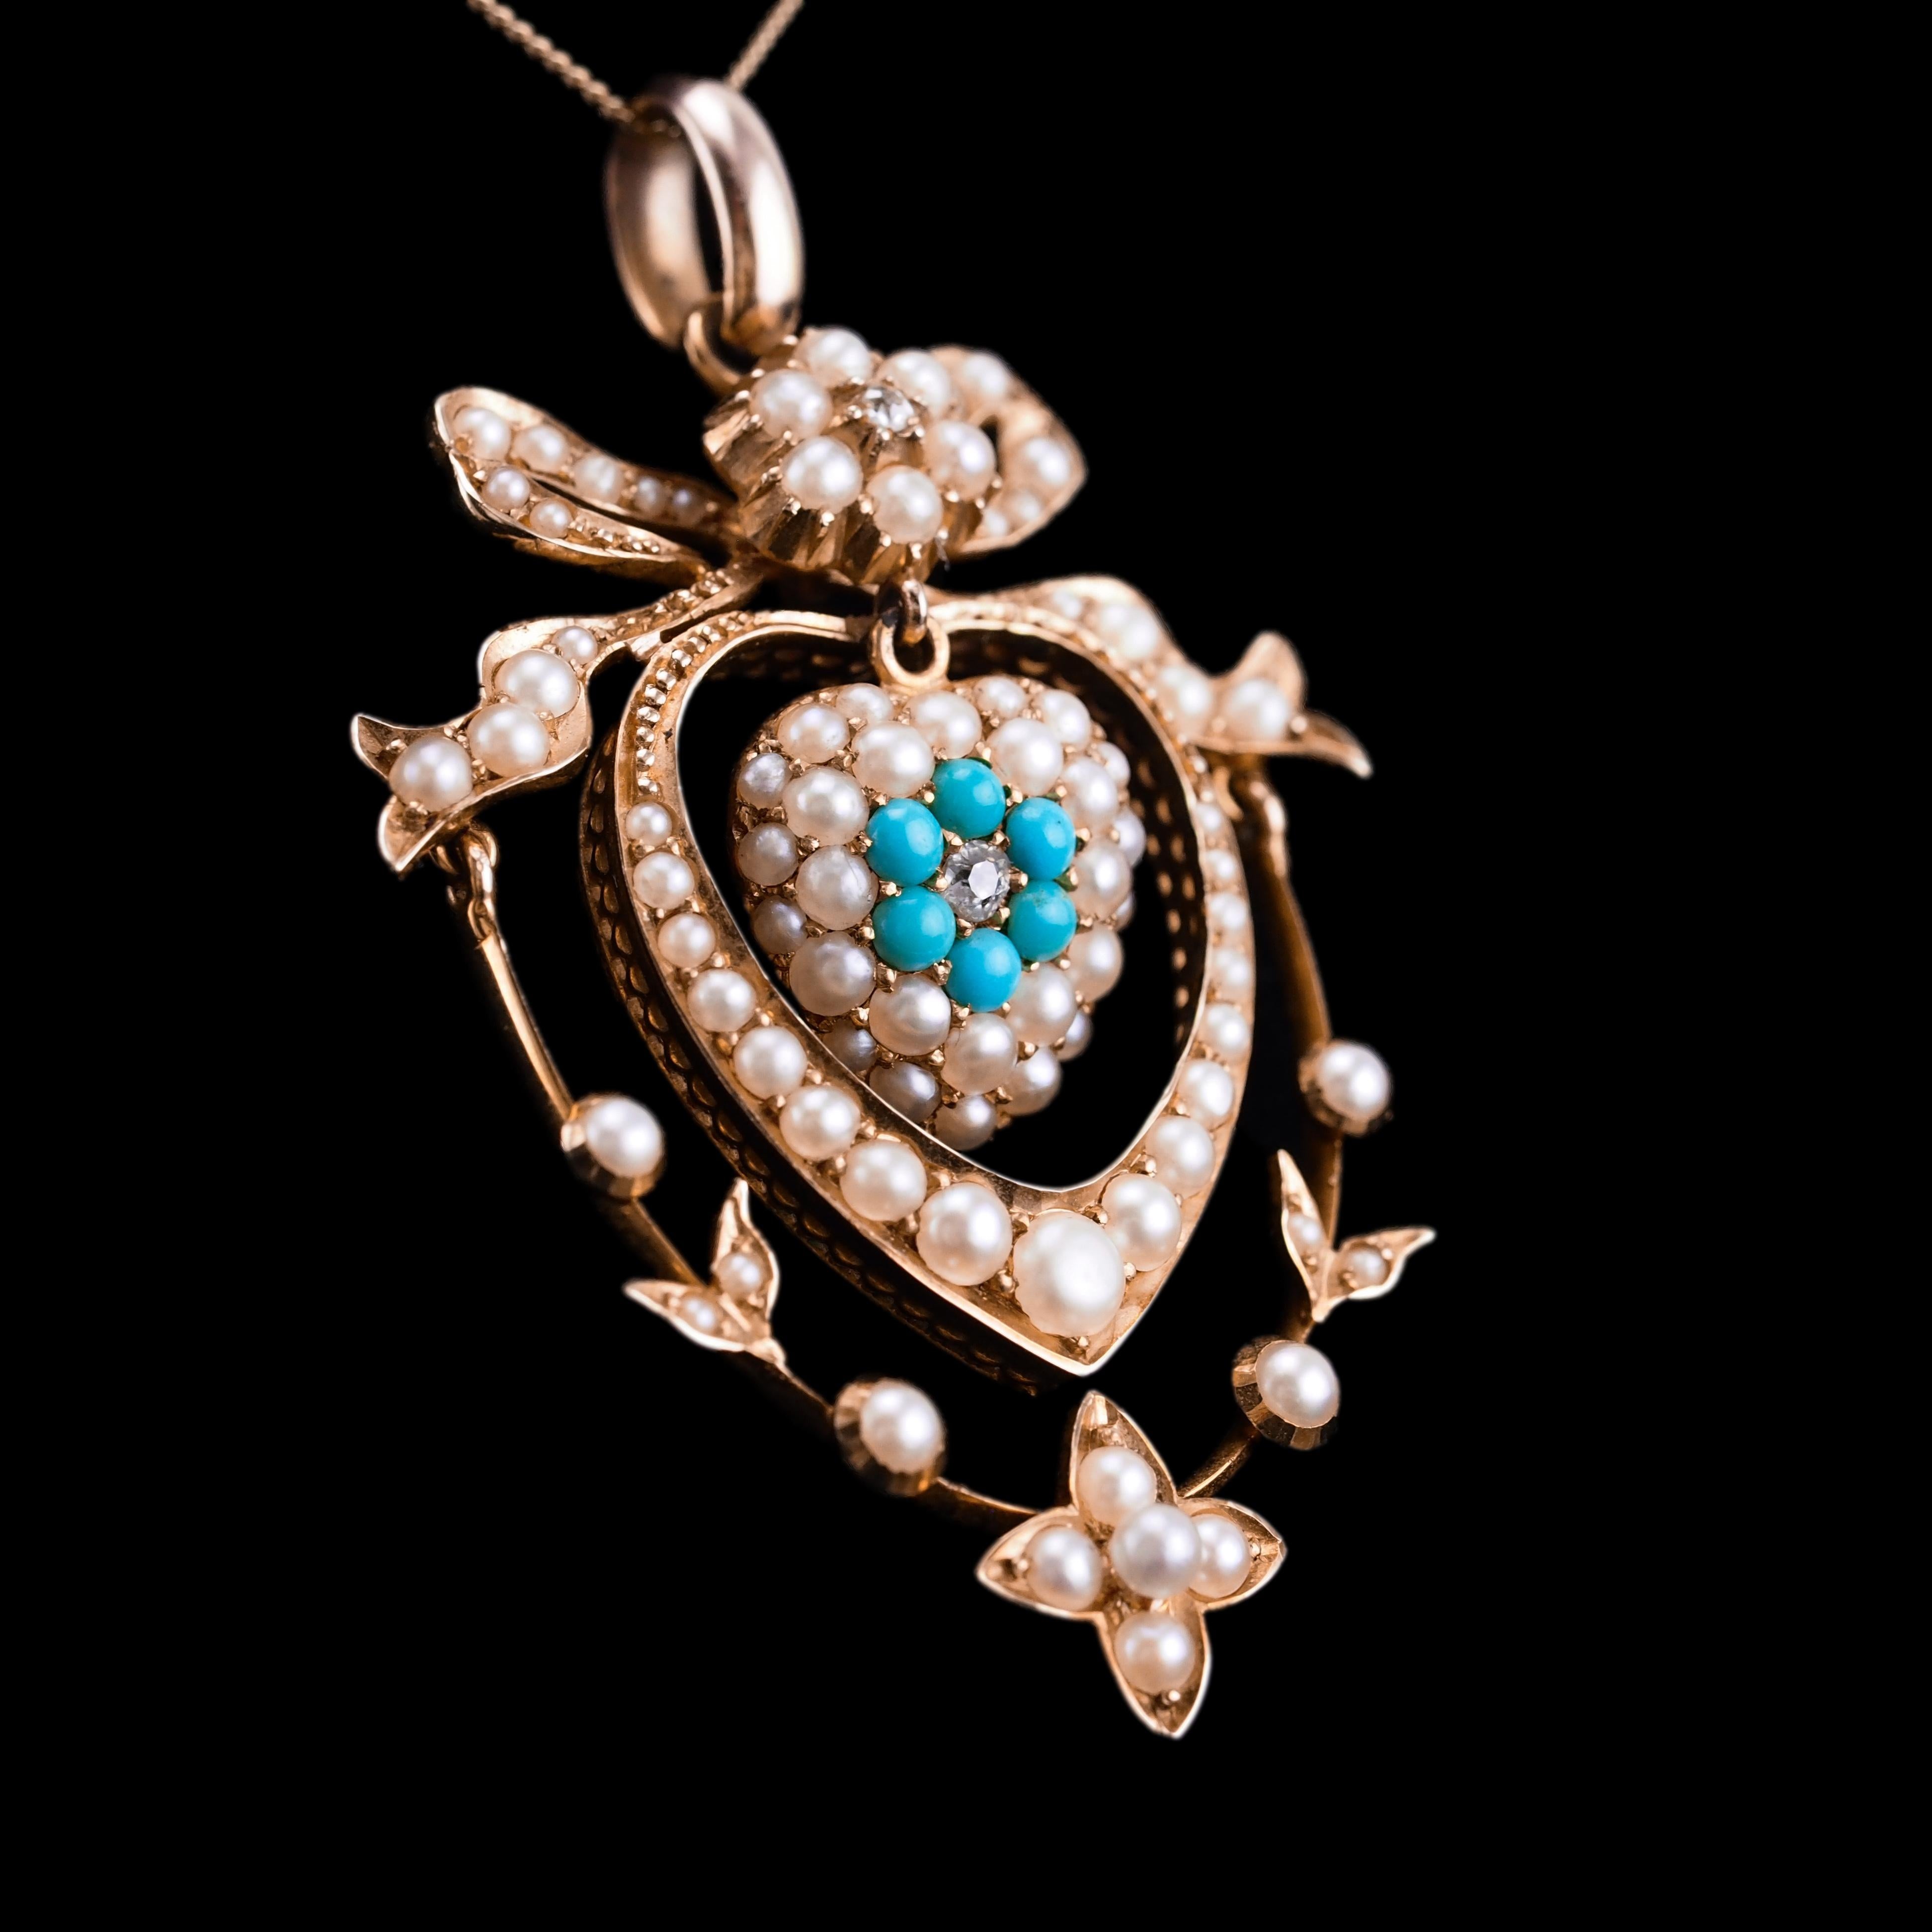 Antique Edwardian 15K Gold Turquoise Diamond & Seed Pearl Pendant Necklace c1910 For Sale 7